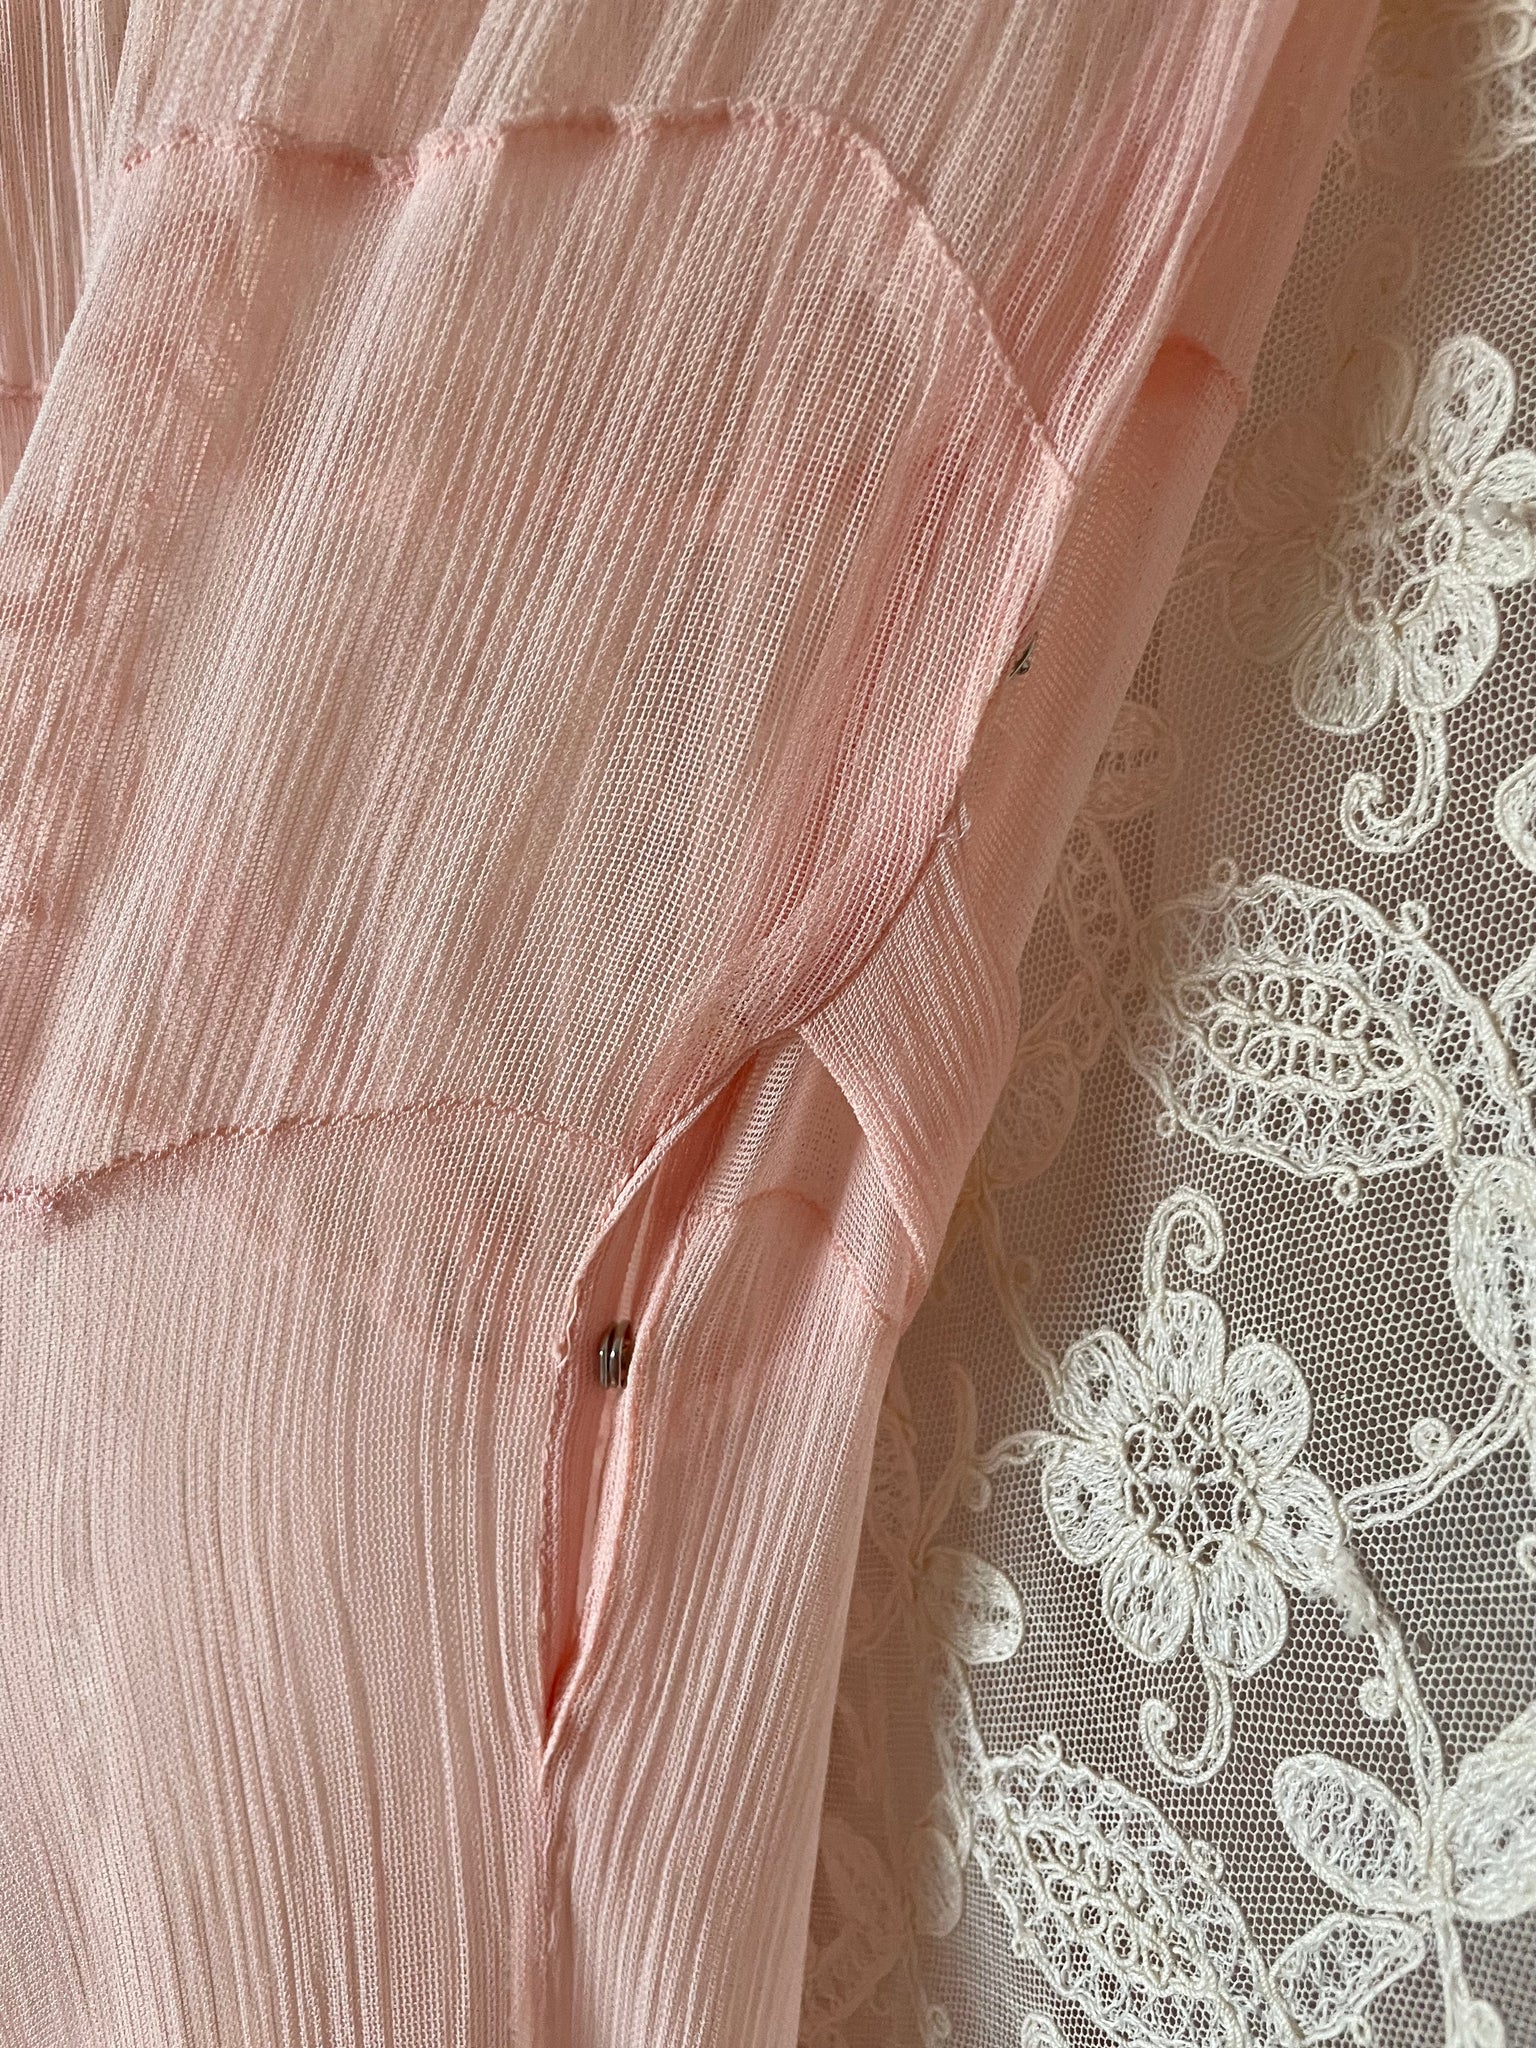 1940s Lace Up Puff Sleeve Sheer Pink Rayon Dress Gown